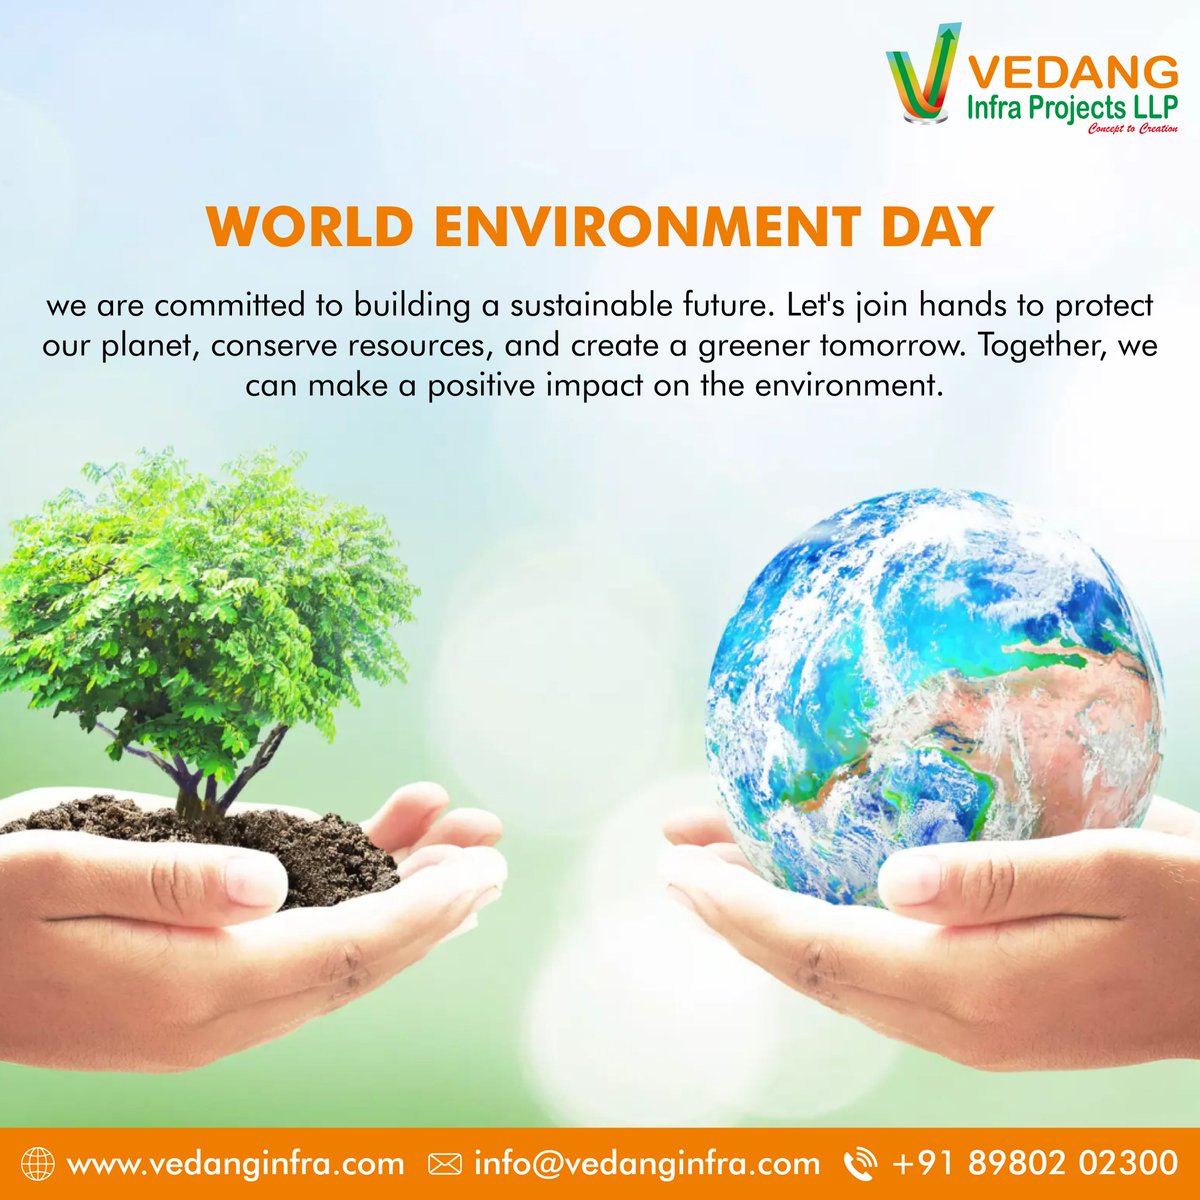 Happy World Environment Day!
Let's join hands to protect our planet, conserve resources, and create a greener tomorrow. Together, we can make a positive impact on the environment. 

#WorldEnvironmentDay #SustainableInfrastructure #GreenFuture #engineering #infrastructureprojects